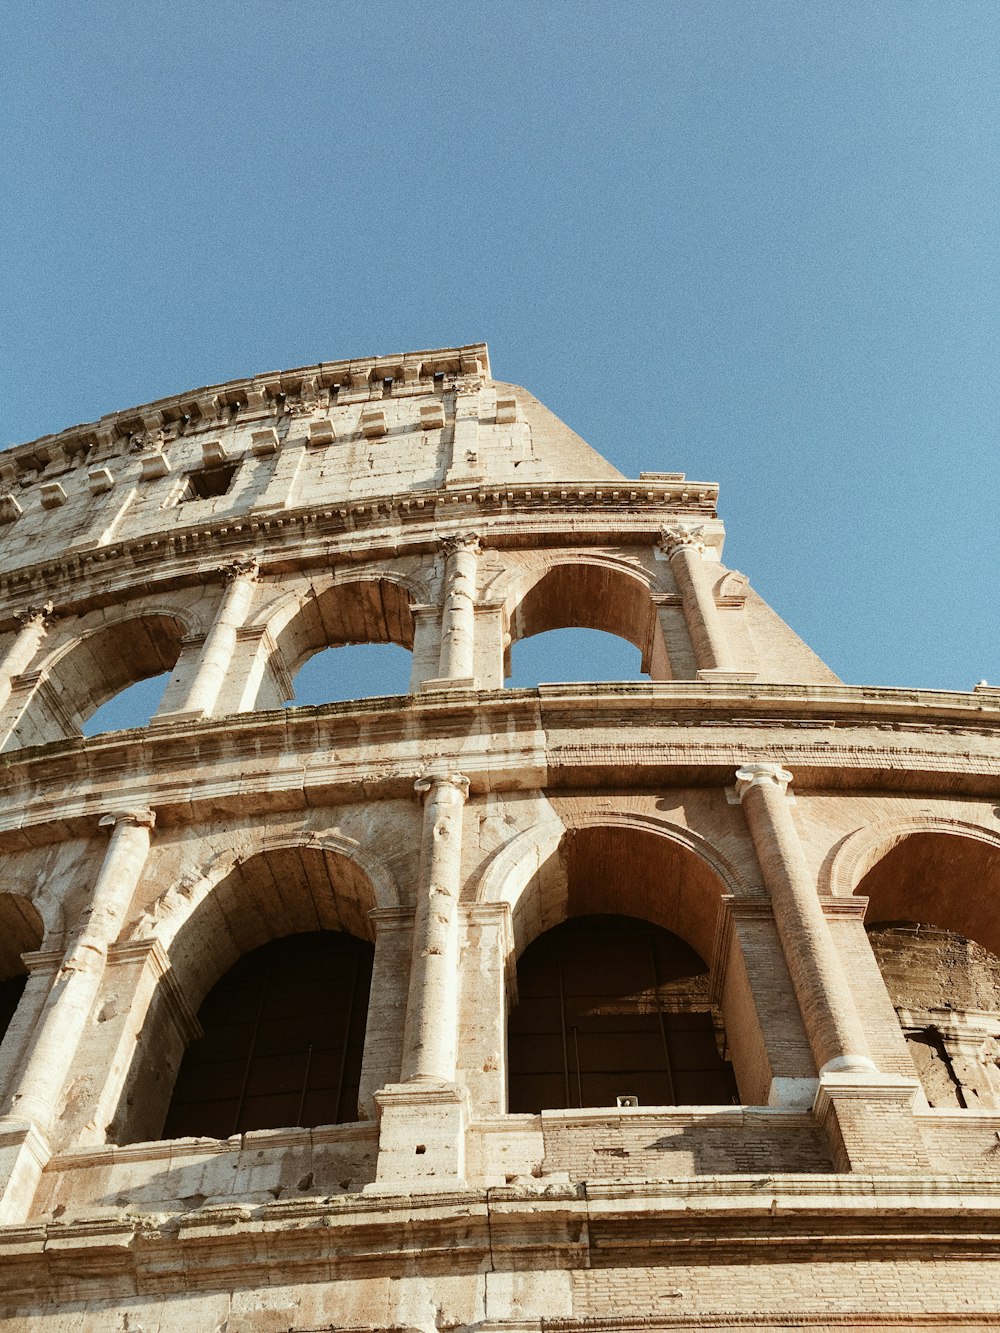 low angle view of Colosseum at Rome Italy